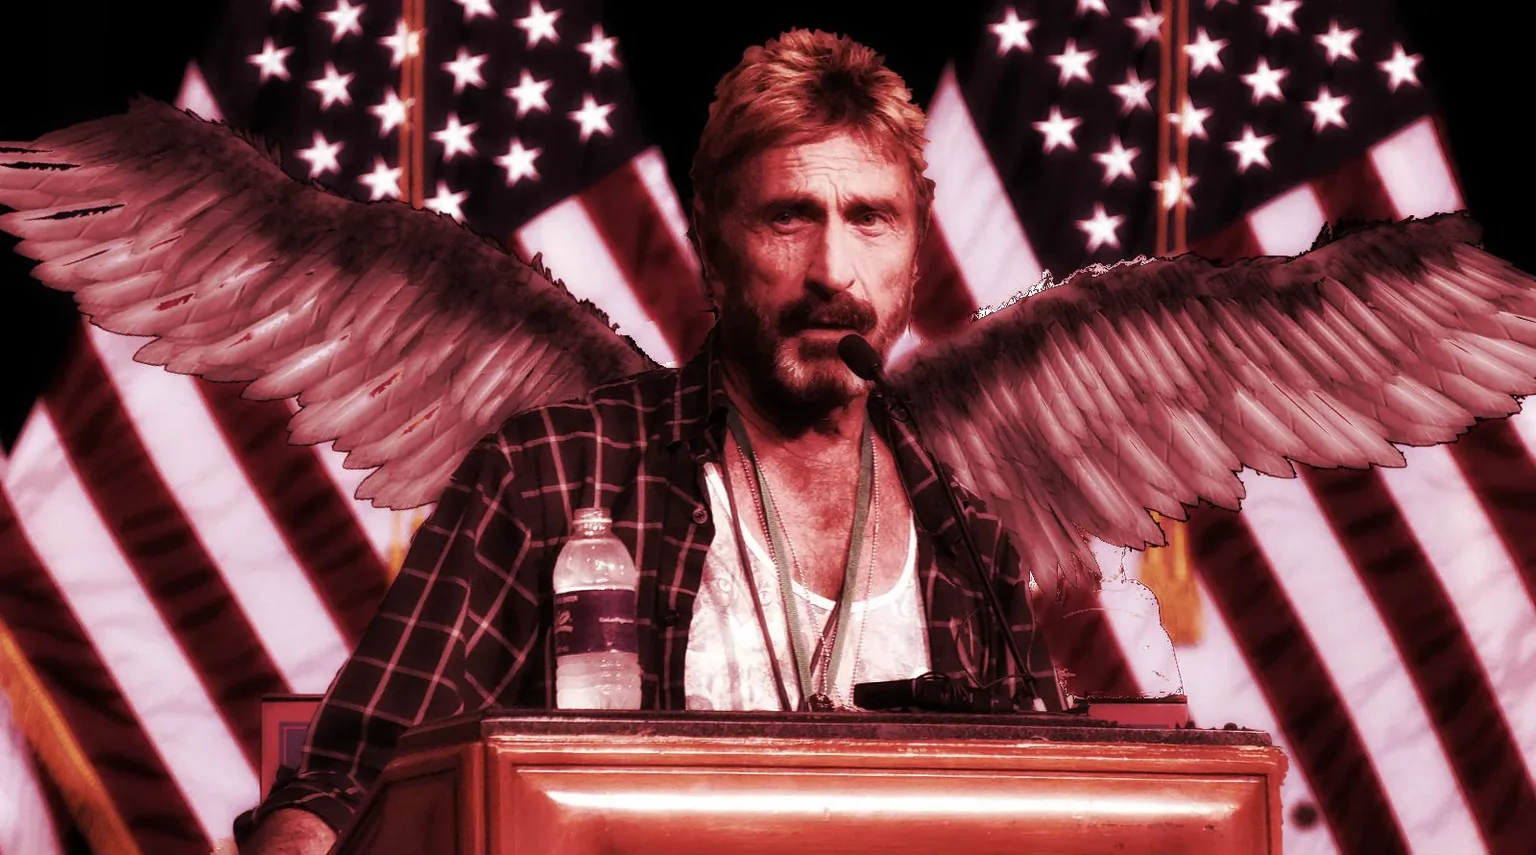 John McAfee was running for president on a platform of....something. 